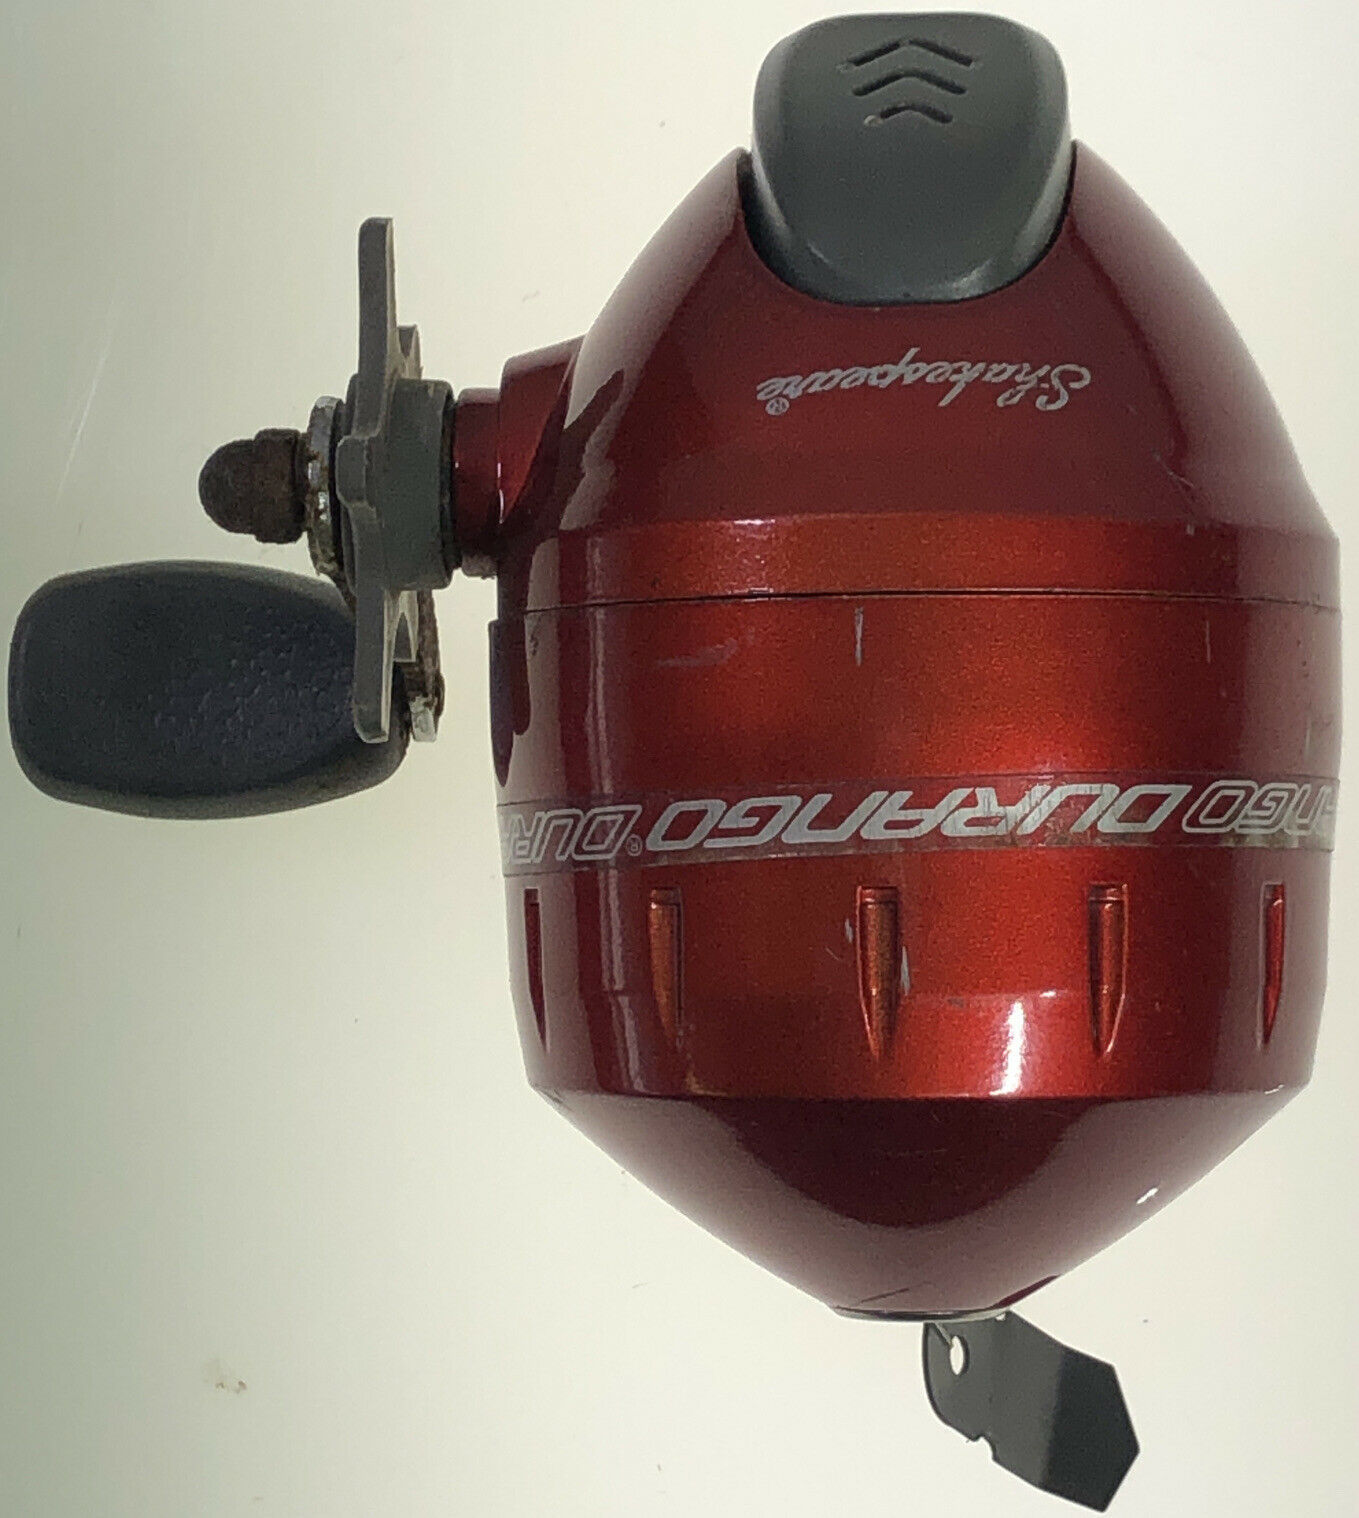 Shakespeare DSC8 Durango Fishing Reel Red and similar items